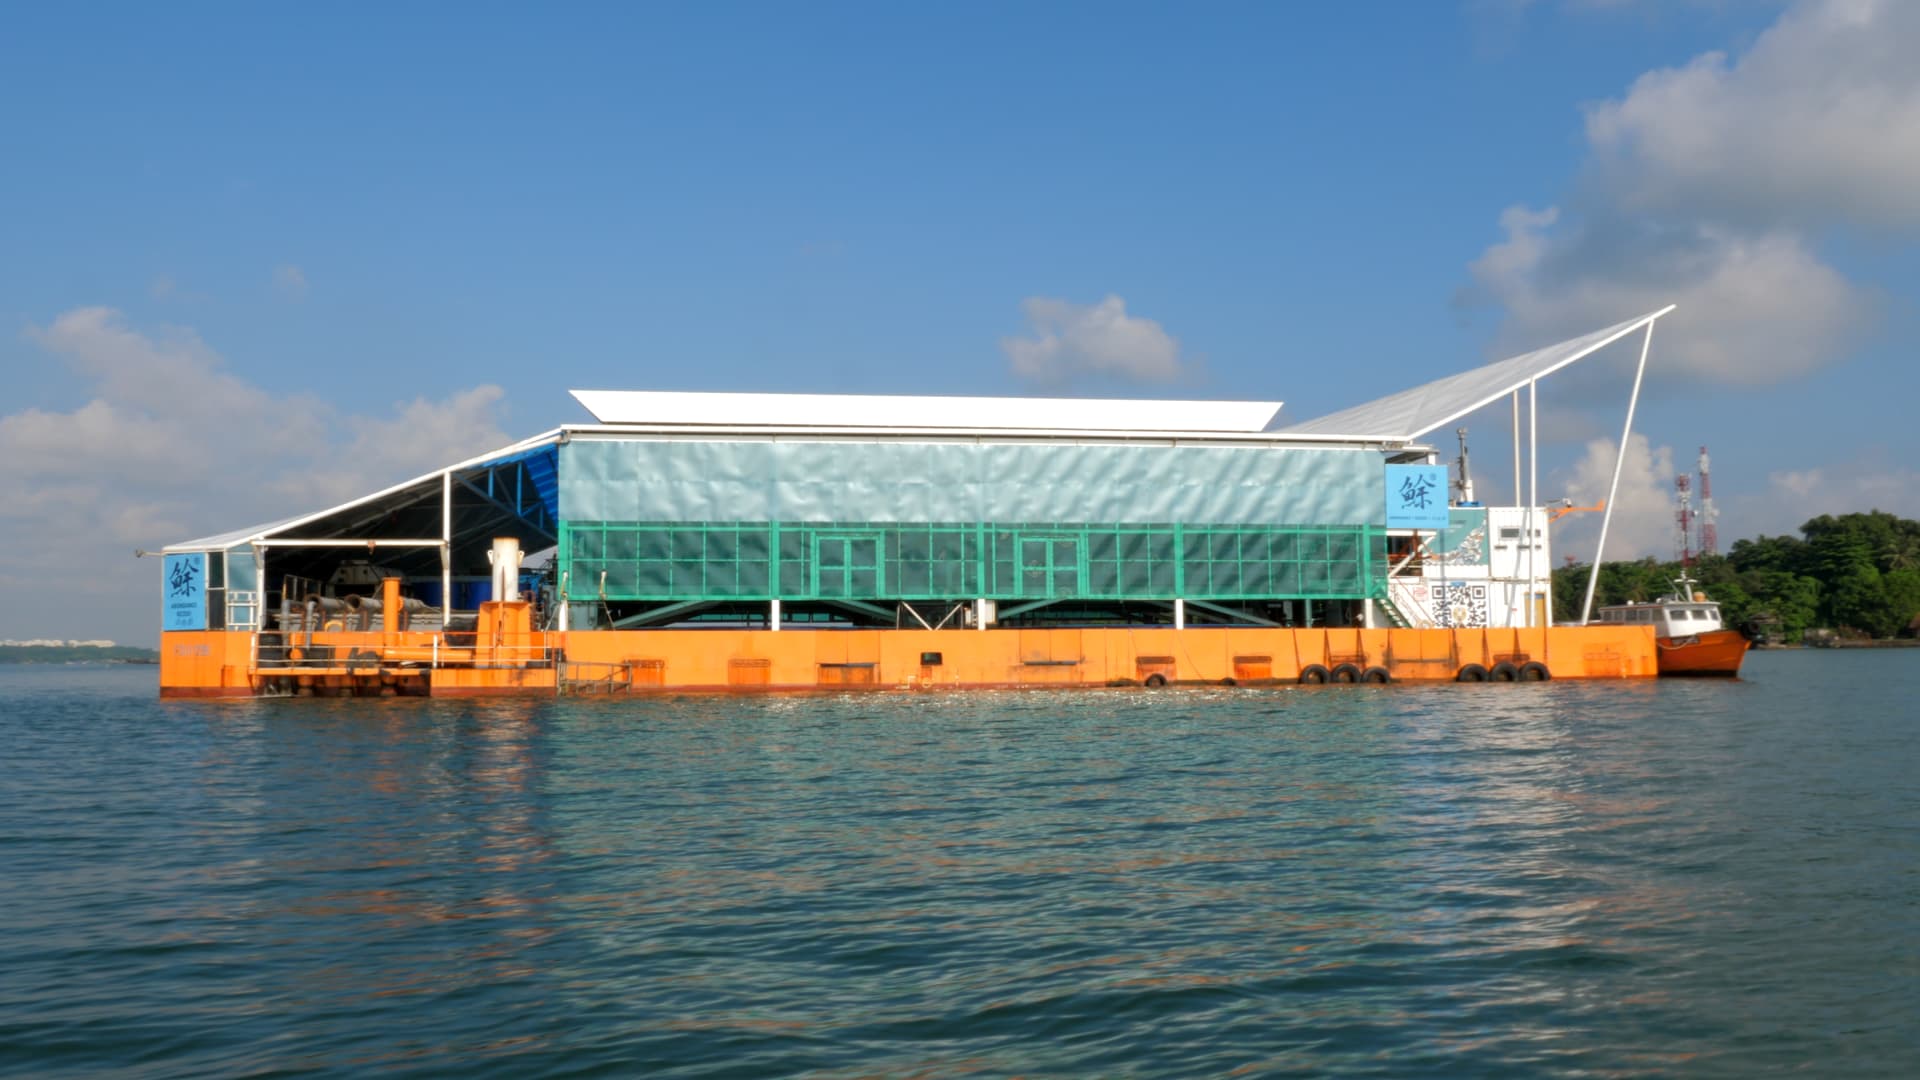 The Eco-Ark is a closed-containment floating fish farm located off a Singapore coast, yielding more than 160 tonnes of fish a year.